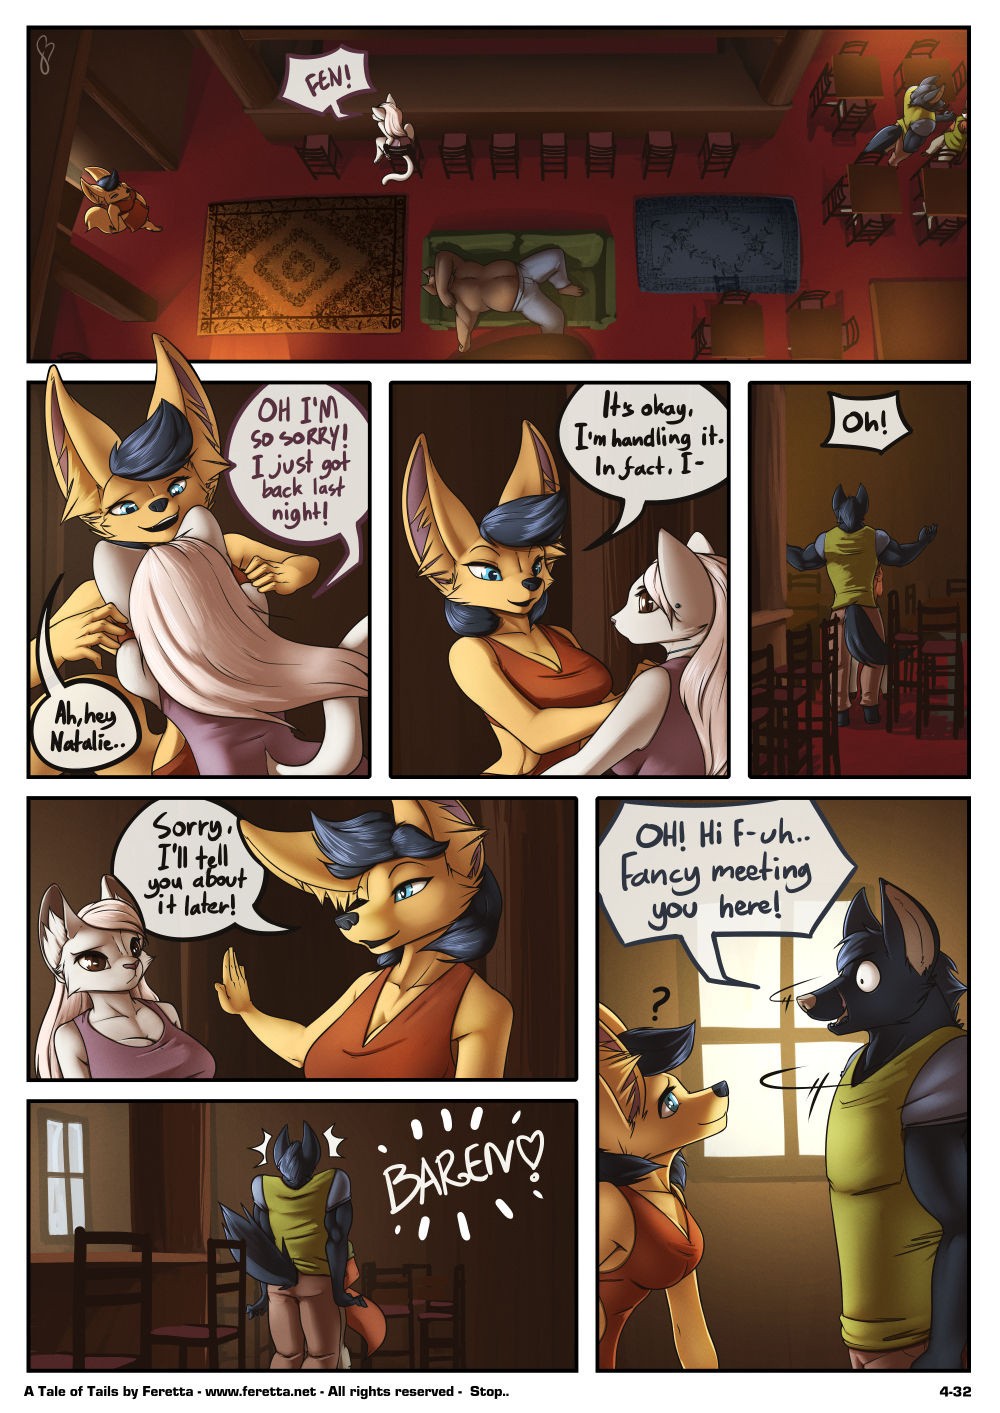 A Tale of Tails 4 - Matters of the mind porn comic picture 32